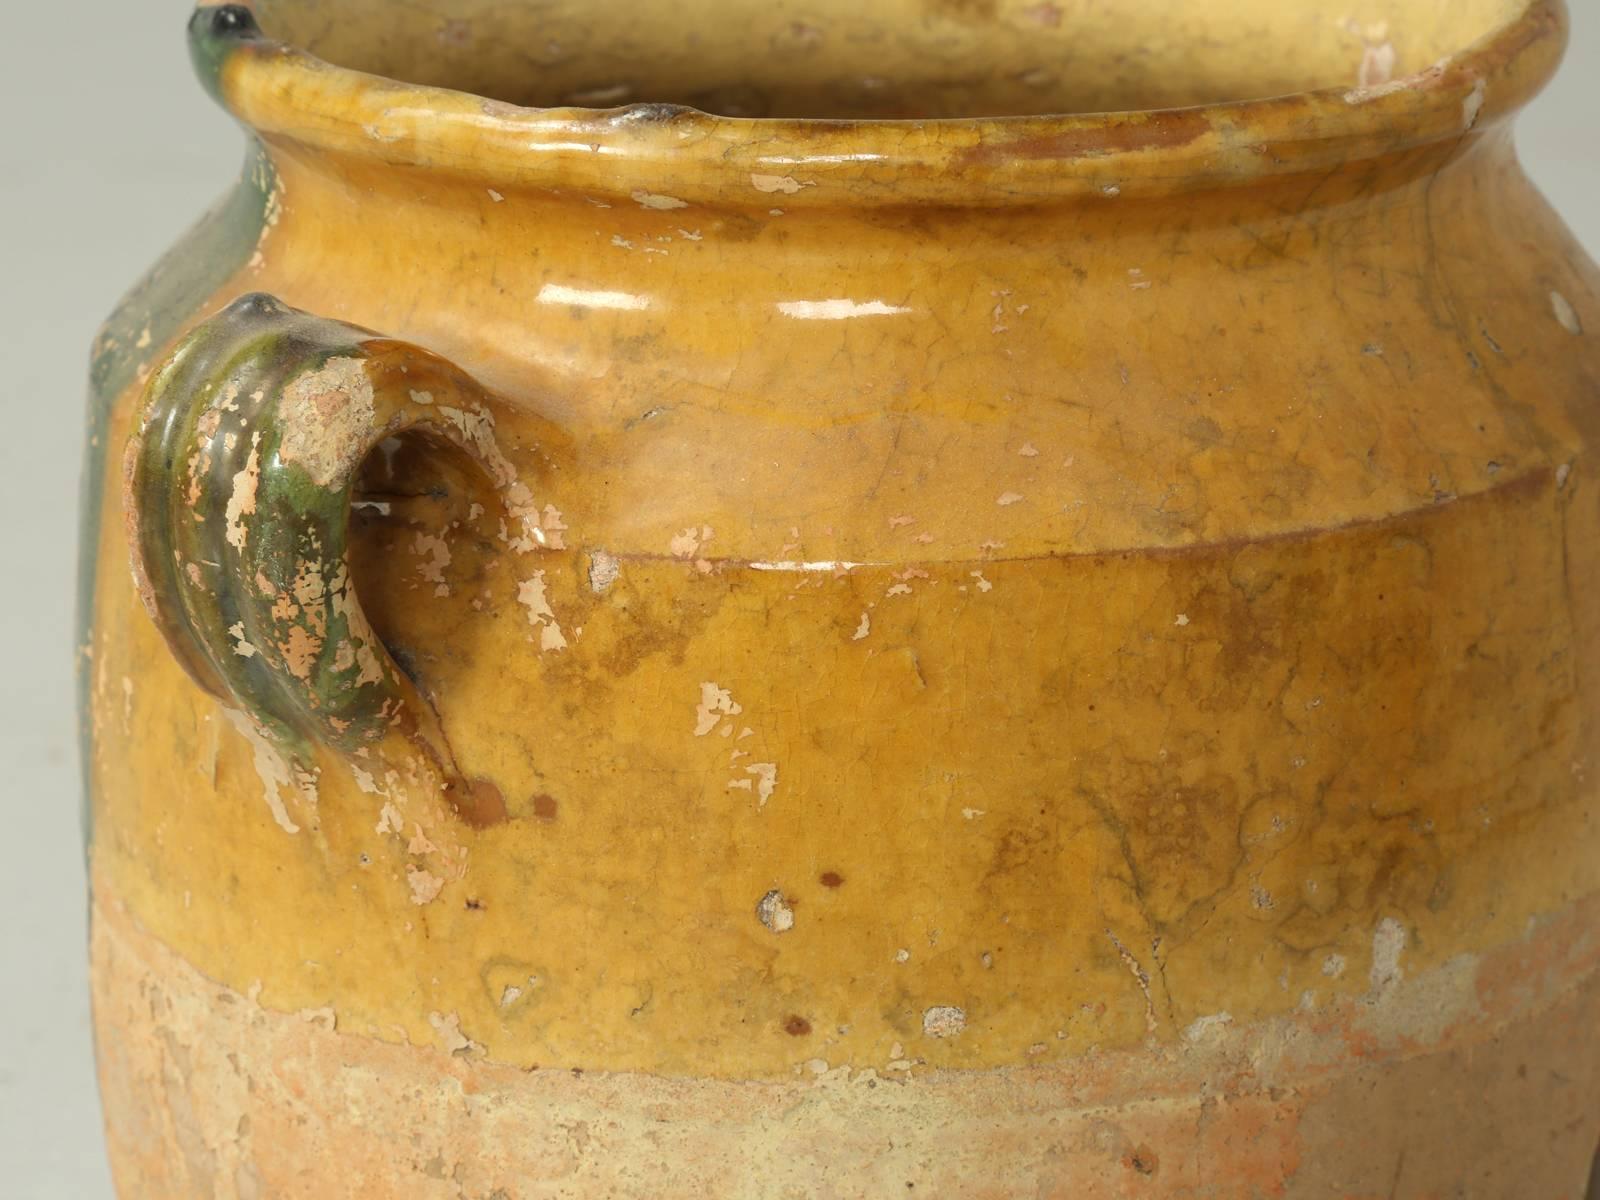 Fired Antique French Confit Pot or Jar Originally Used for Storing Food Many Available